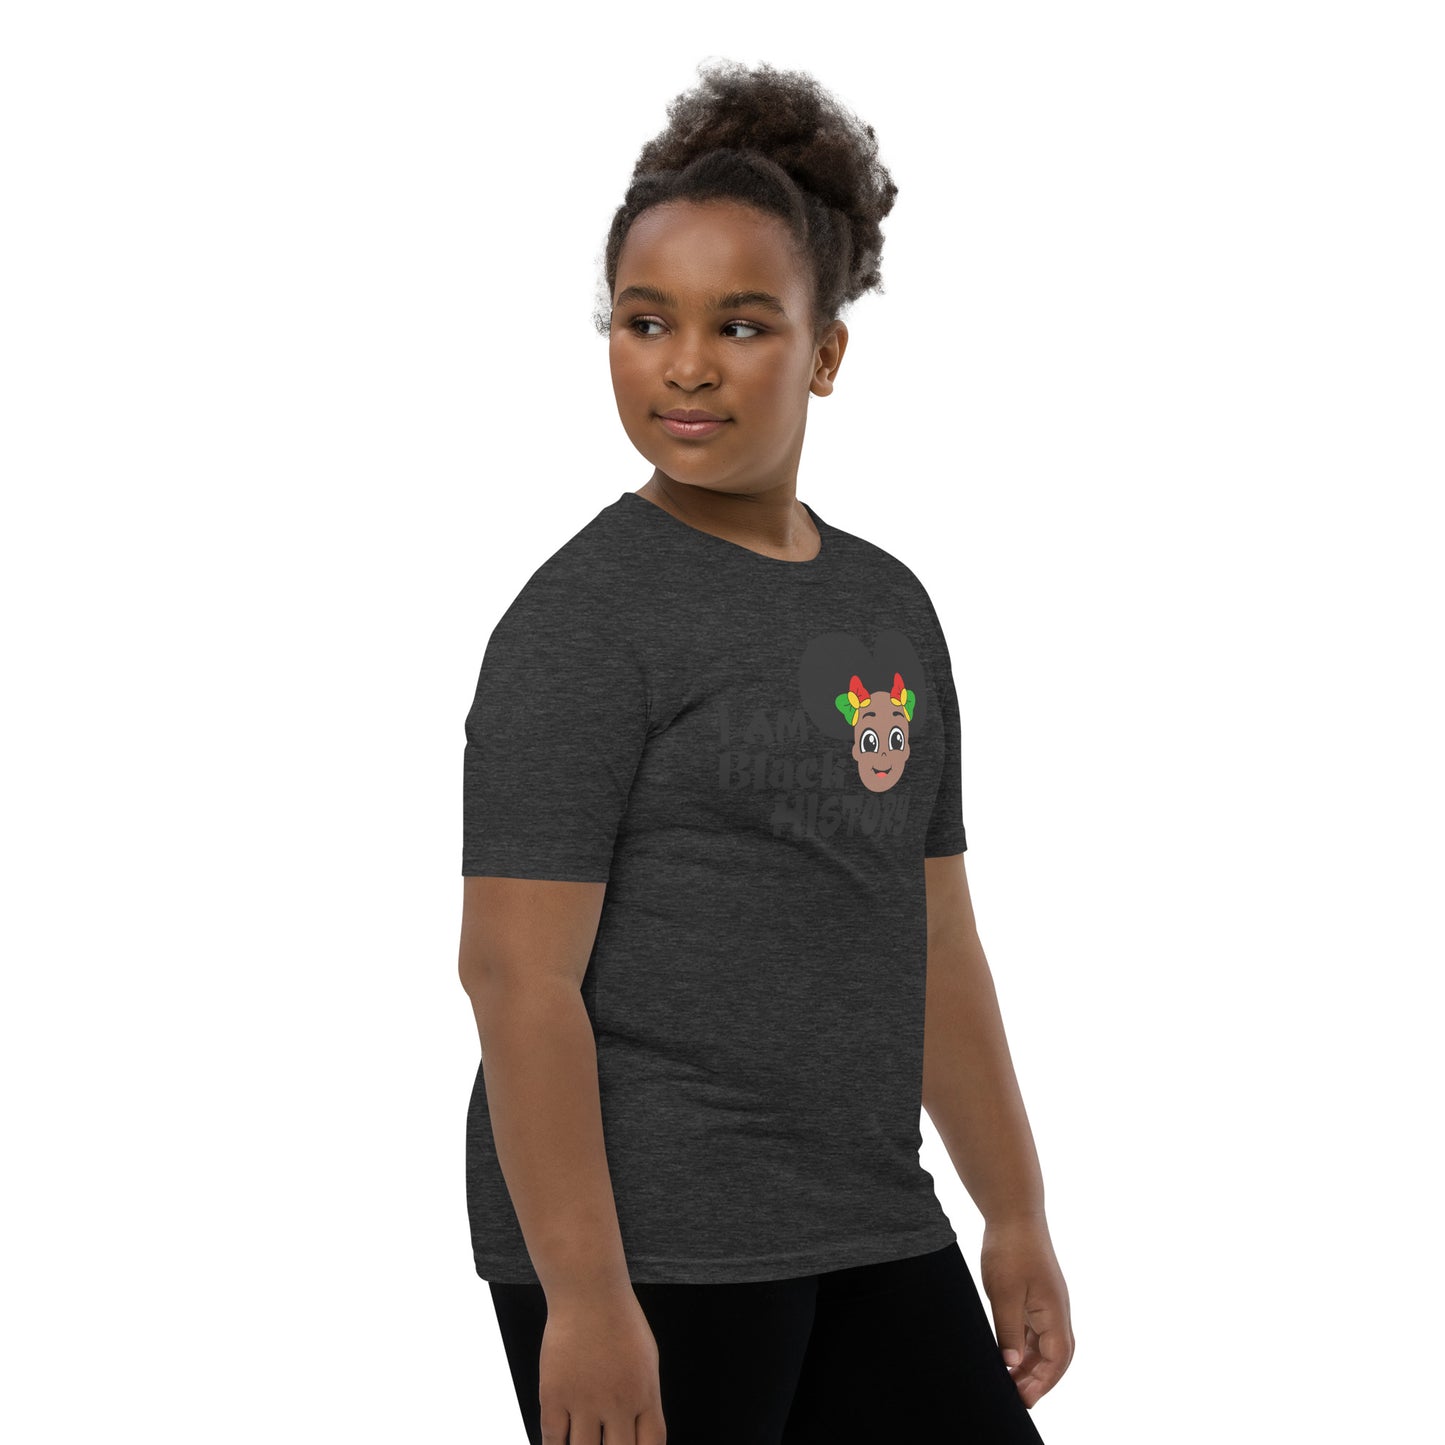 Youth Short Sleeve T-Shirt - I Am Black History (Girl with Afro Puffs)